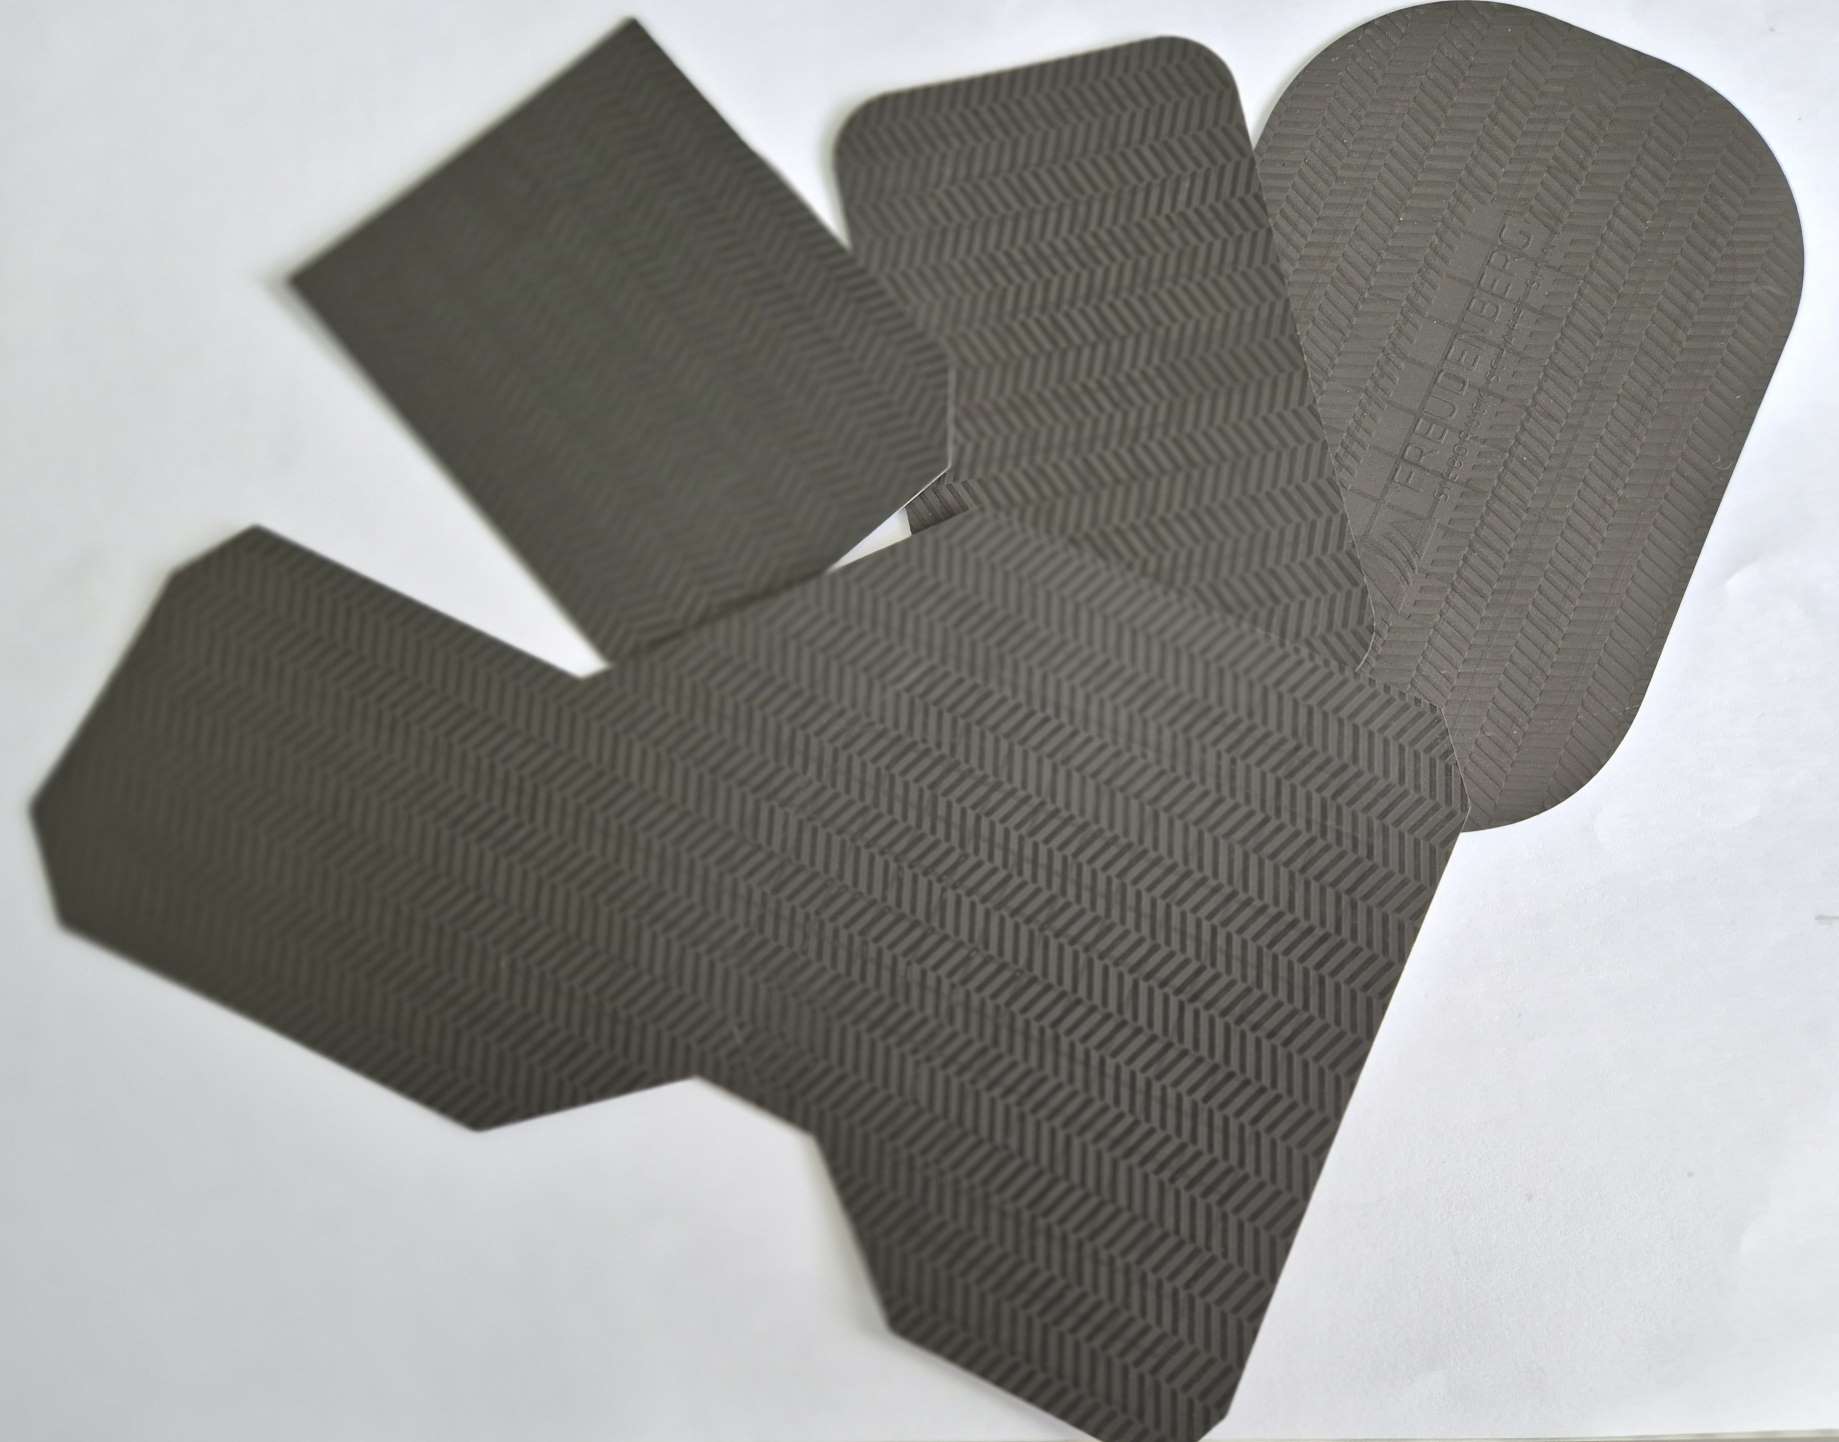 Read more about the article Printed Electrods for Smart Textiles